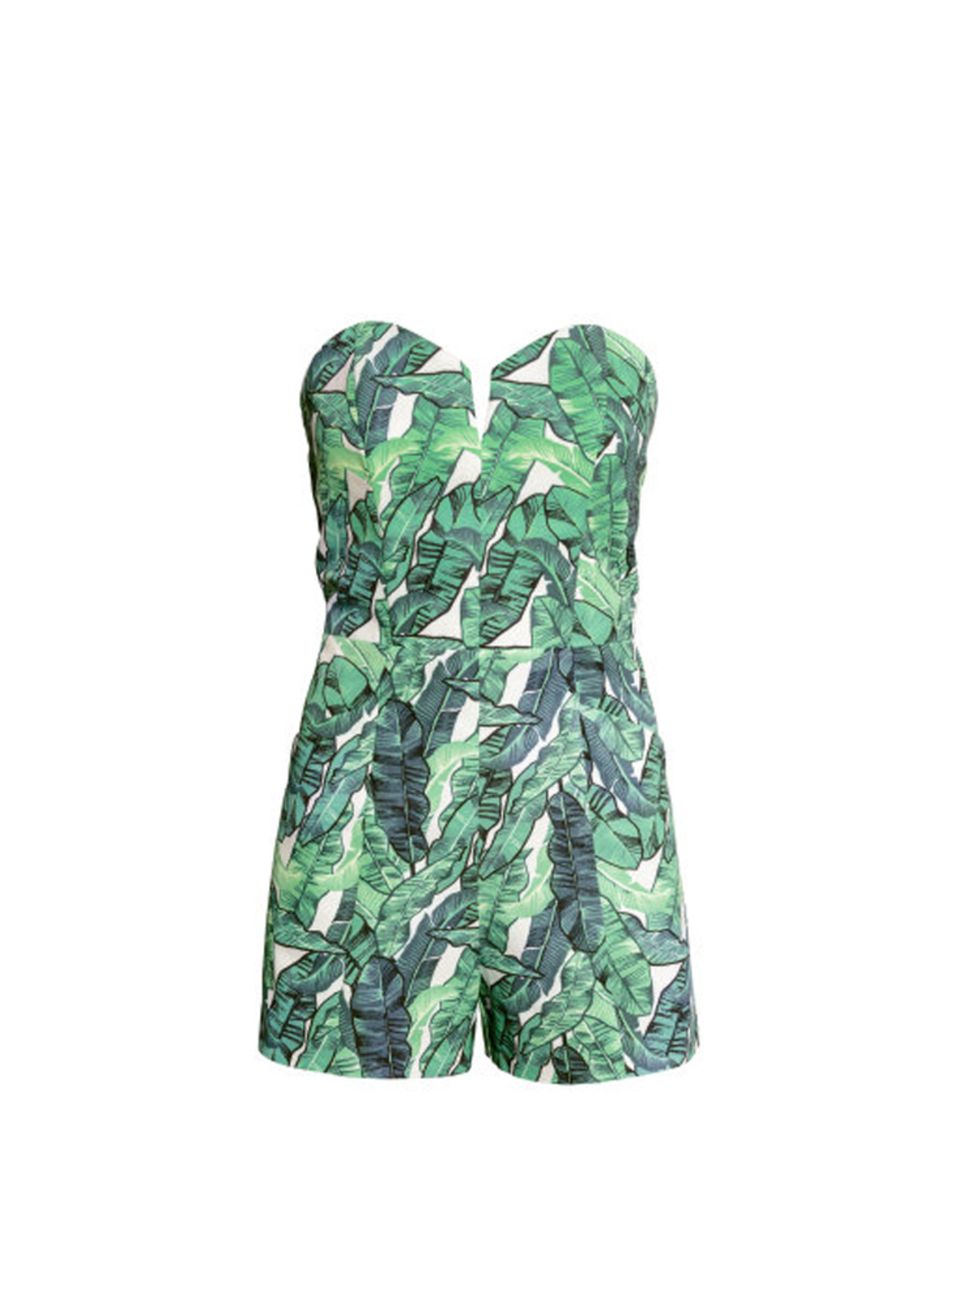 <p>Doesnt this playsuit just shout, pool party?</p>

<p><a href="http://www.hm.com/gb/product/84958?article=84958-A" target="_blank">H&M</a> playsuit, £29.99</p>